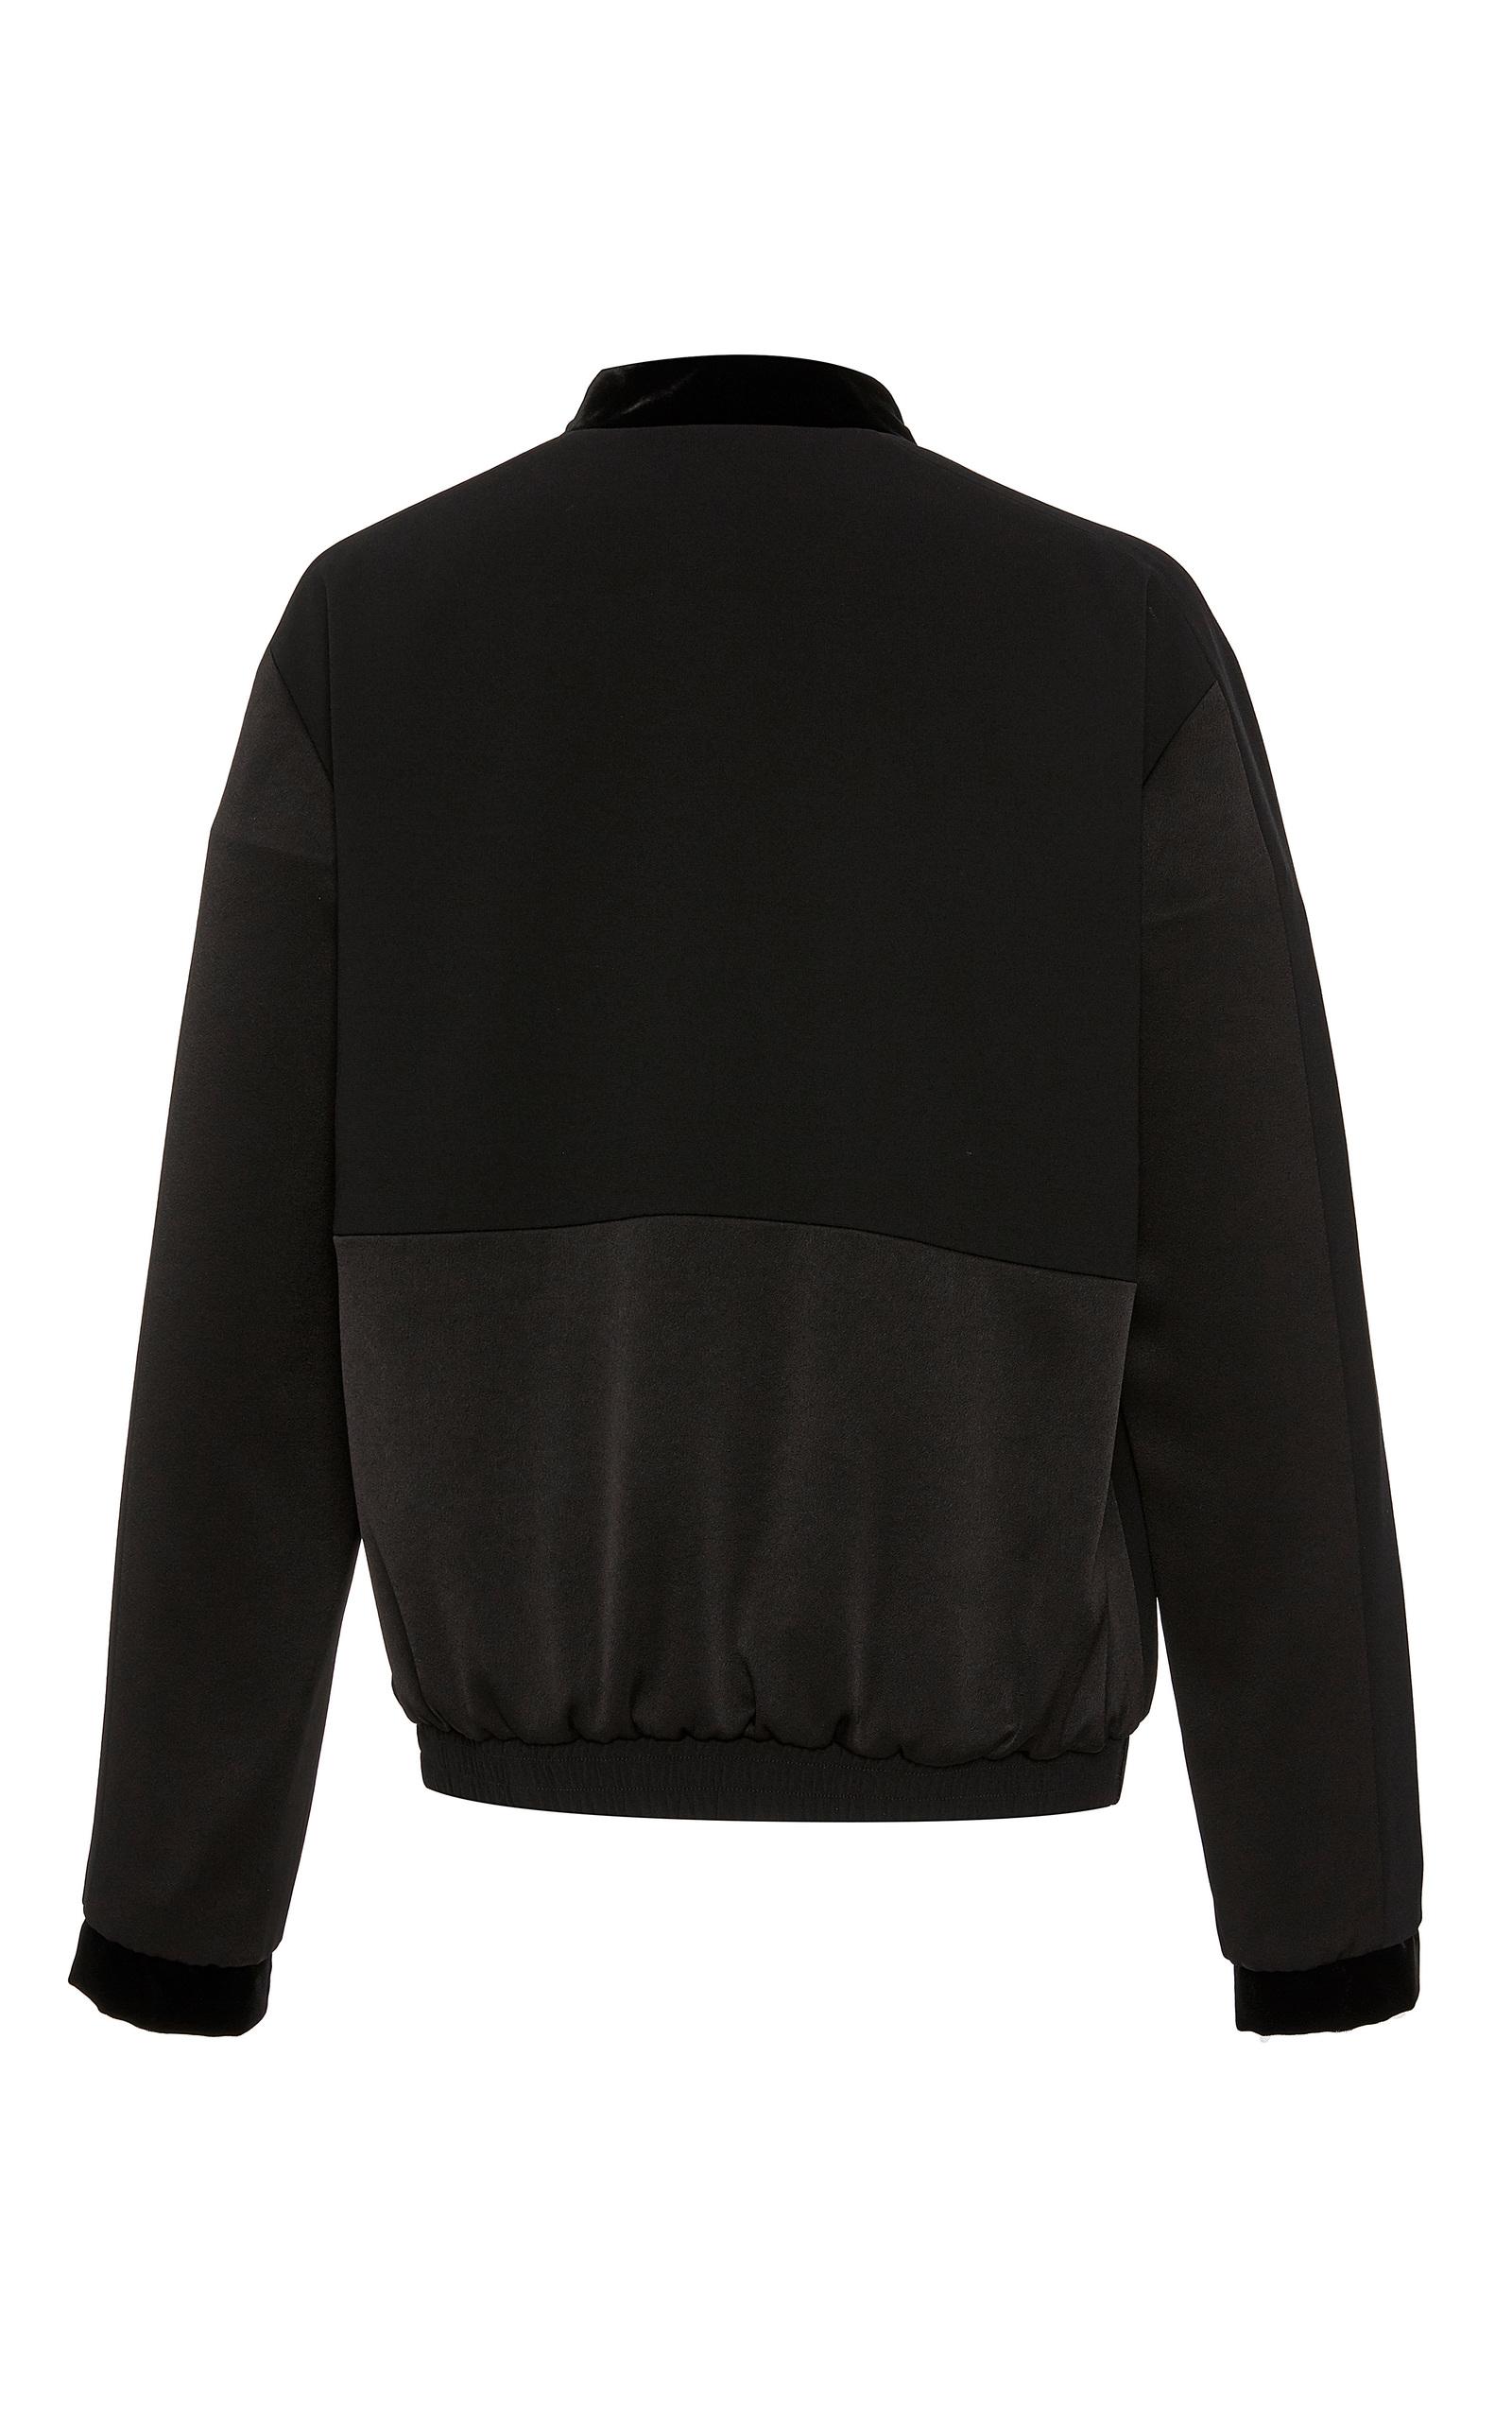 Lyst - Paule Ka Bomber Jacket With Embroidery in Black